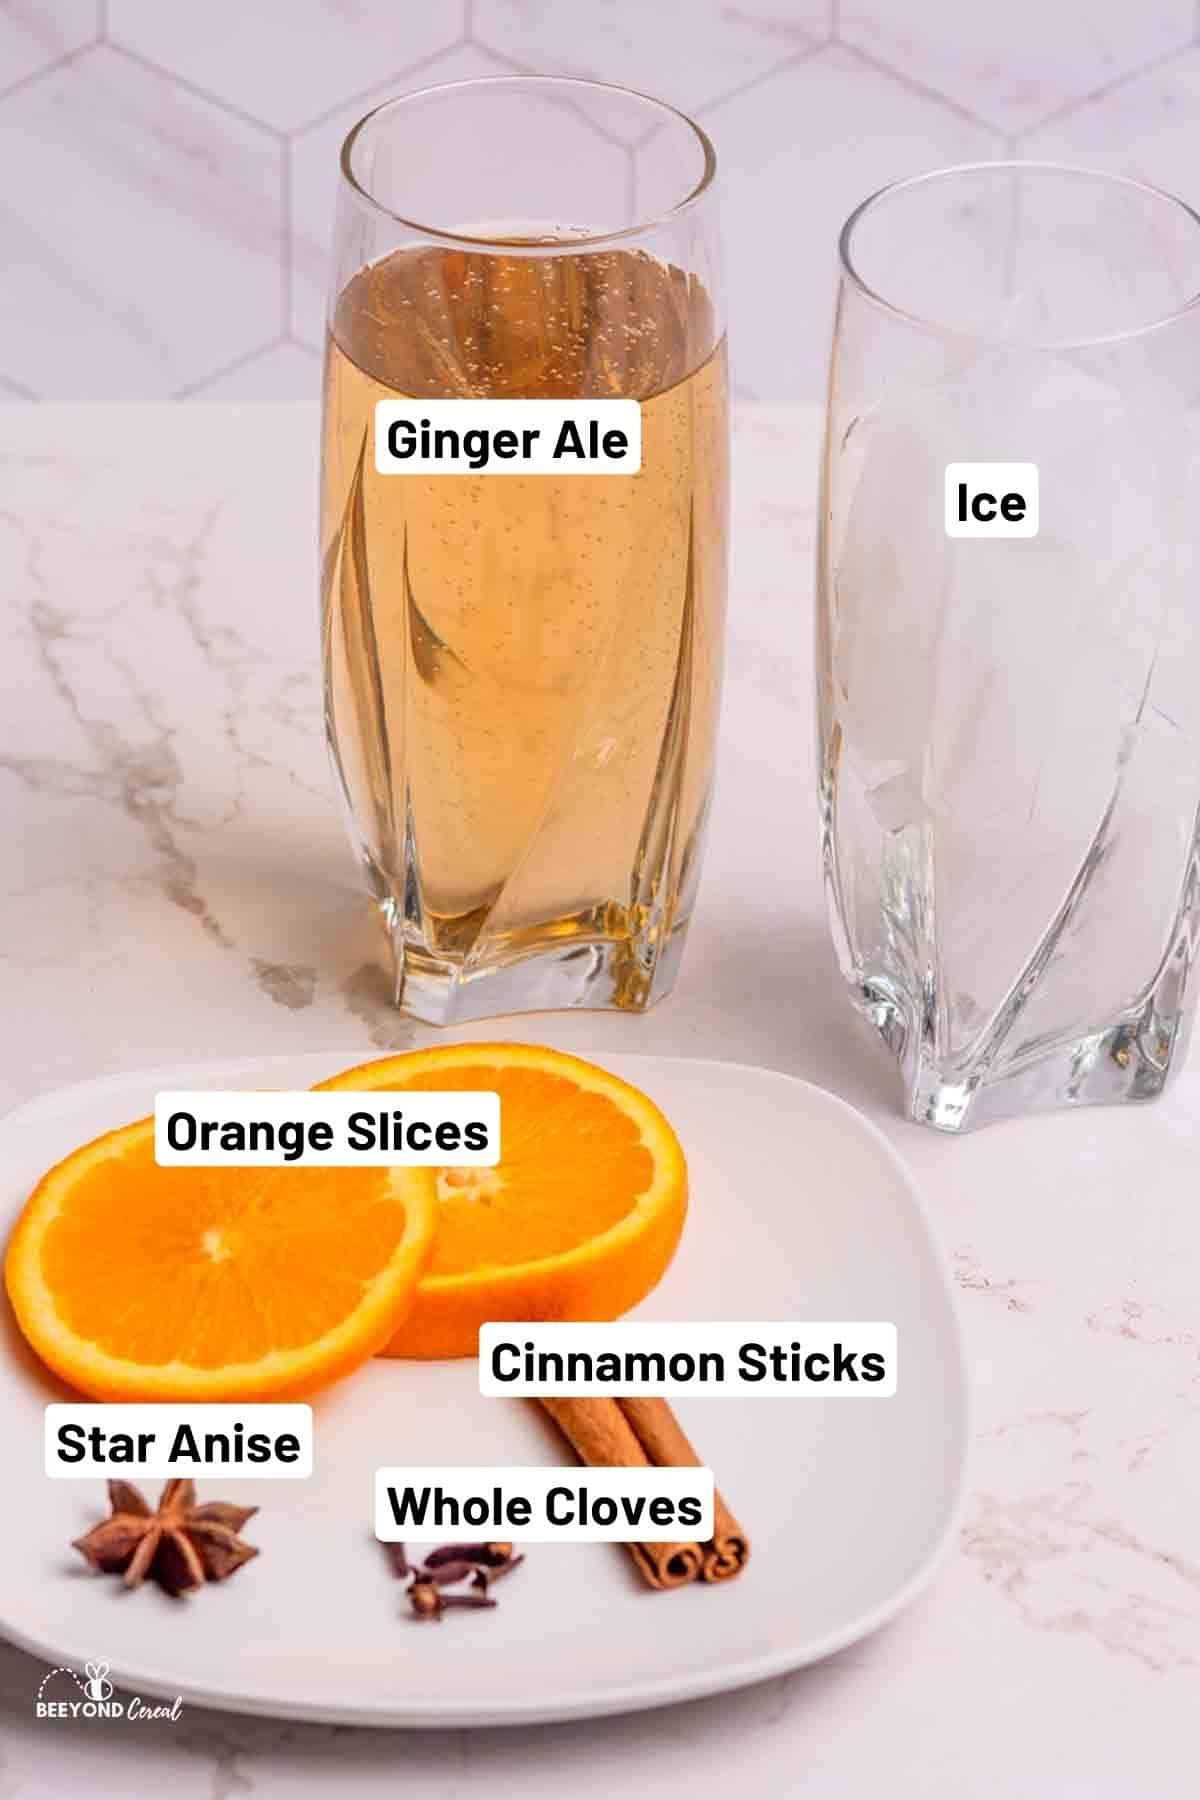 a glass of ice next to a glass of ginger ale and orange slices and spices on a plate.